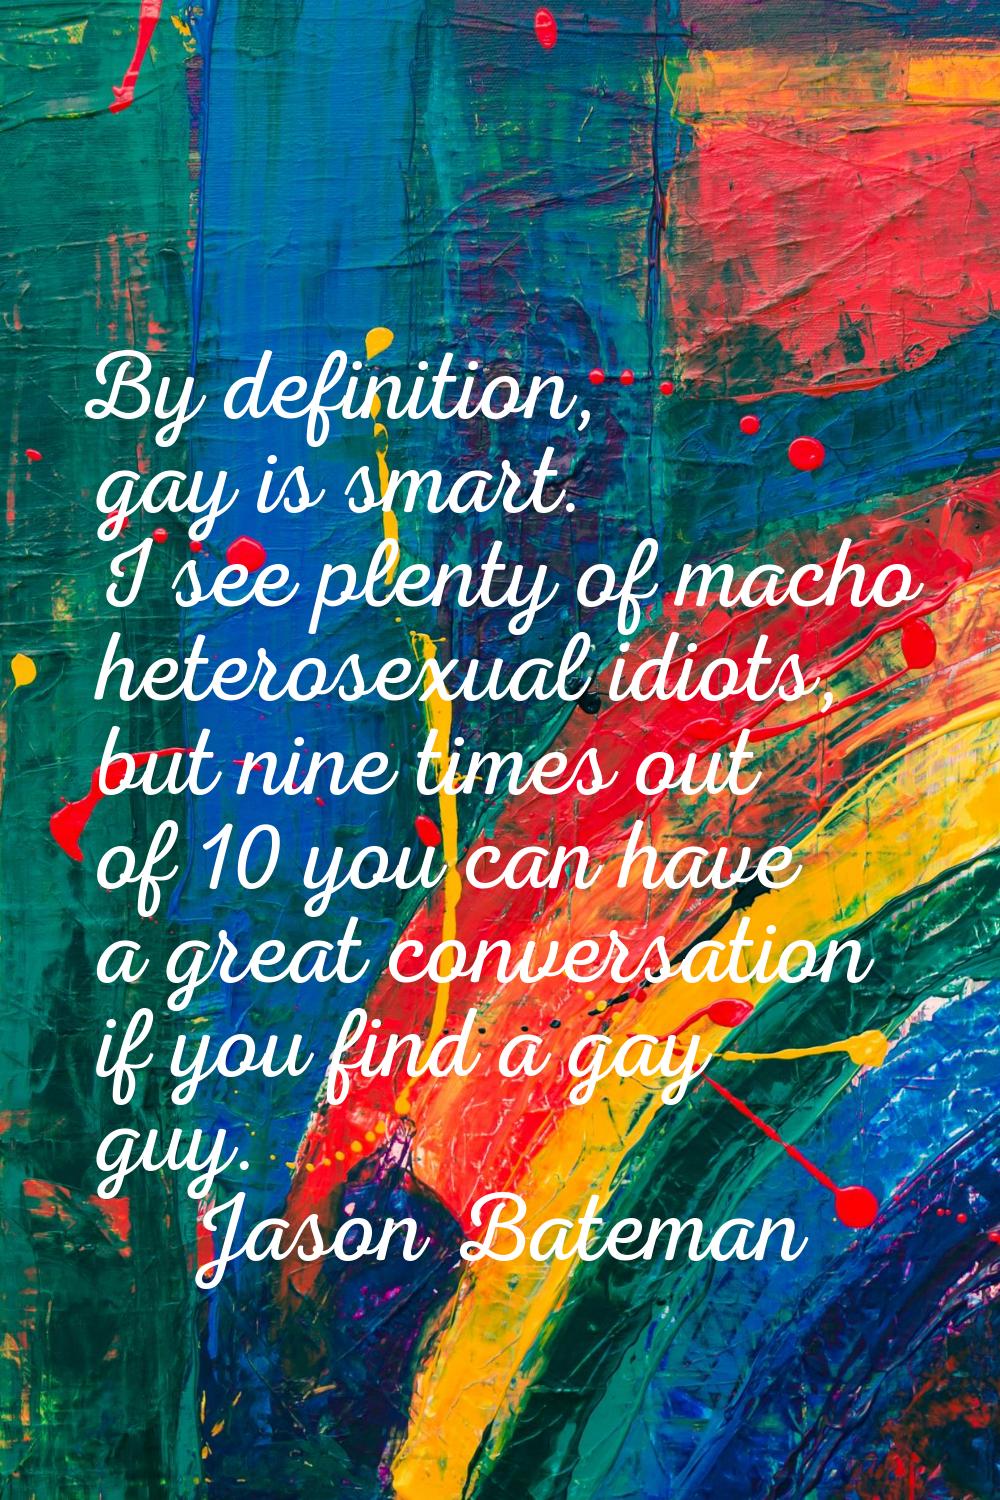 By definition, gay is smart. I see plenty of macho heterosexual idiots, but nine times out of 10 yo